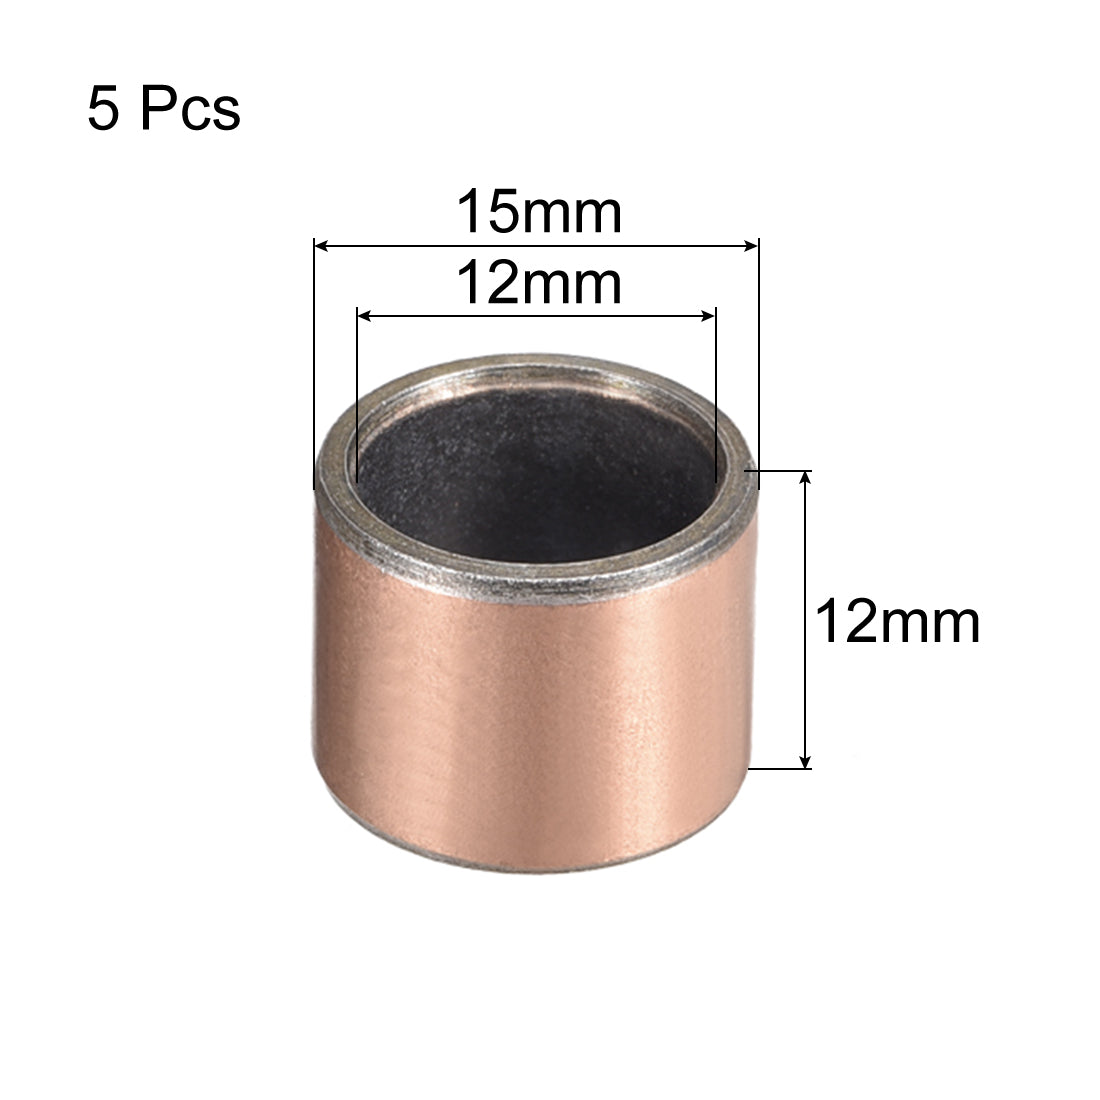 uxcell Uxcell Sleeve (Plain) Bearings 12mm Bore 15mm OD 12mm L Wrapped Oilless Bushings 5pcs